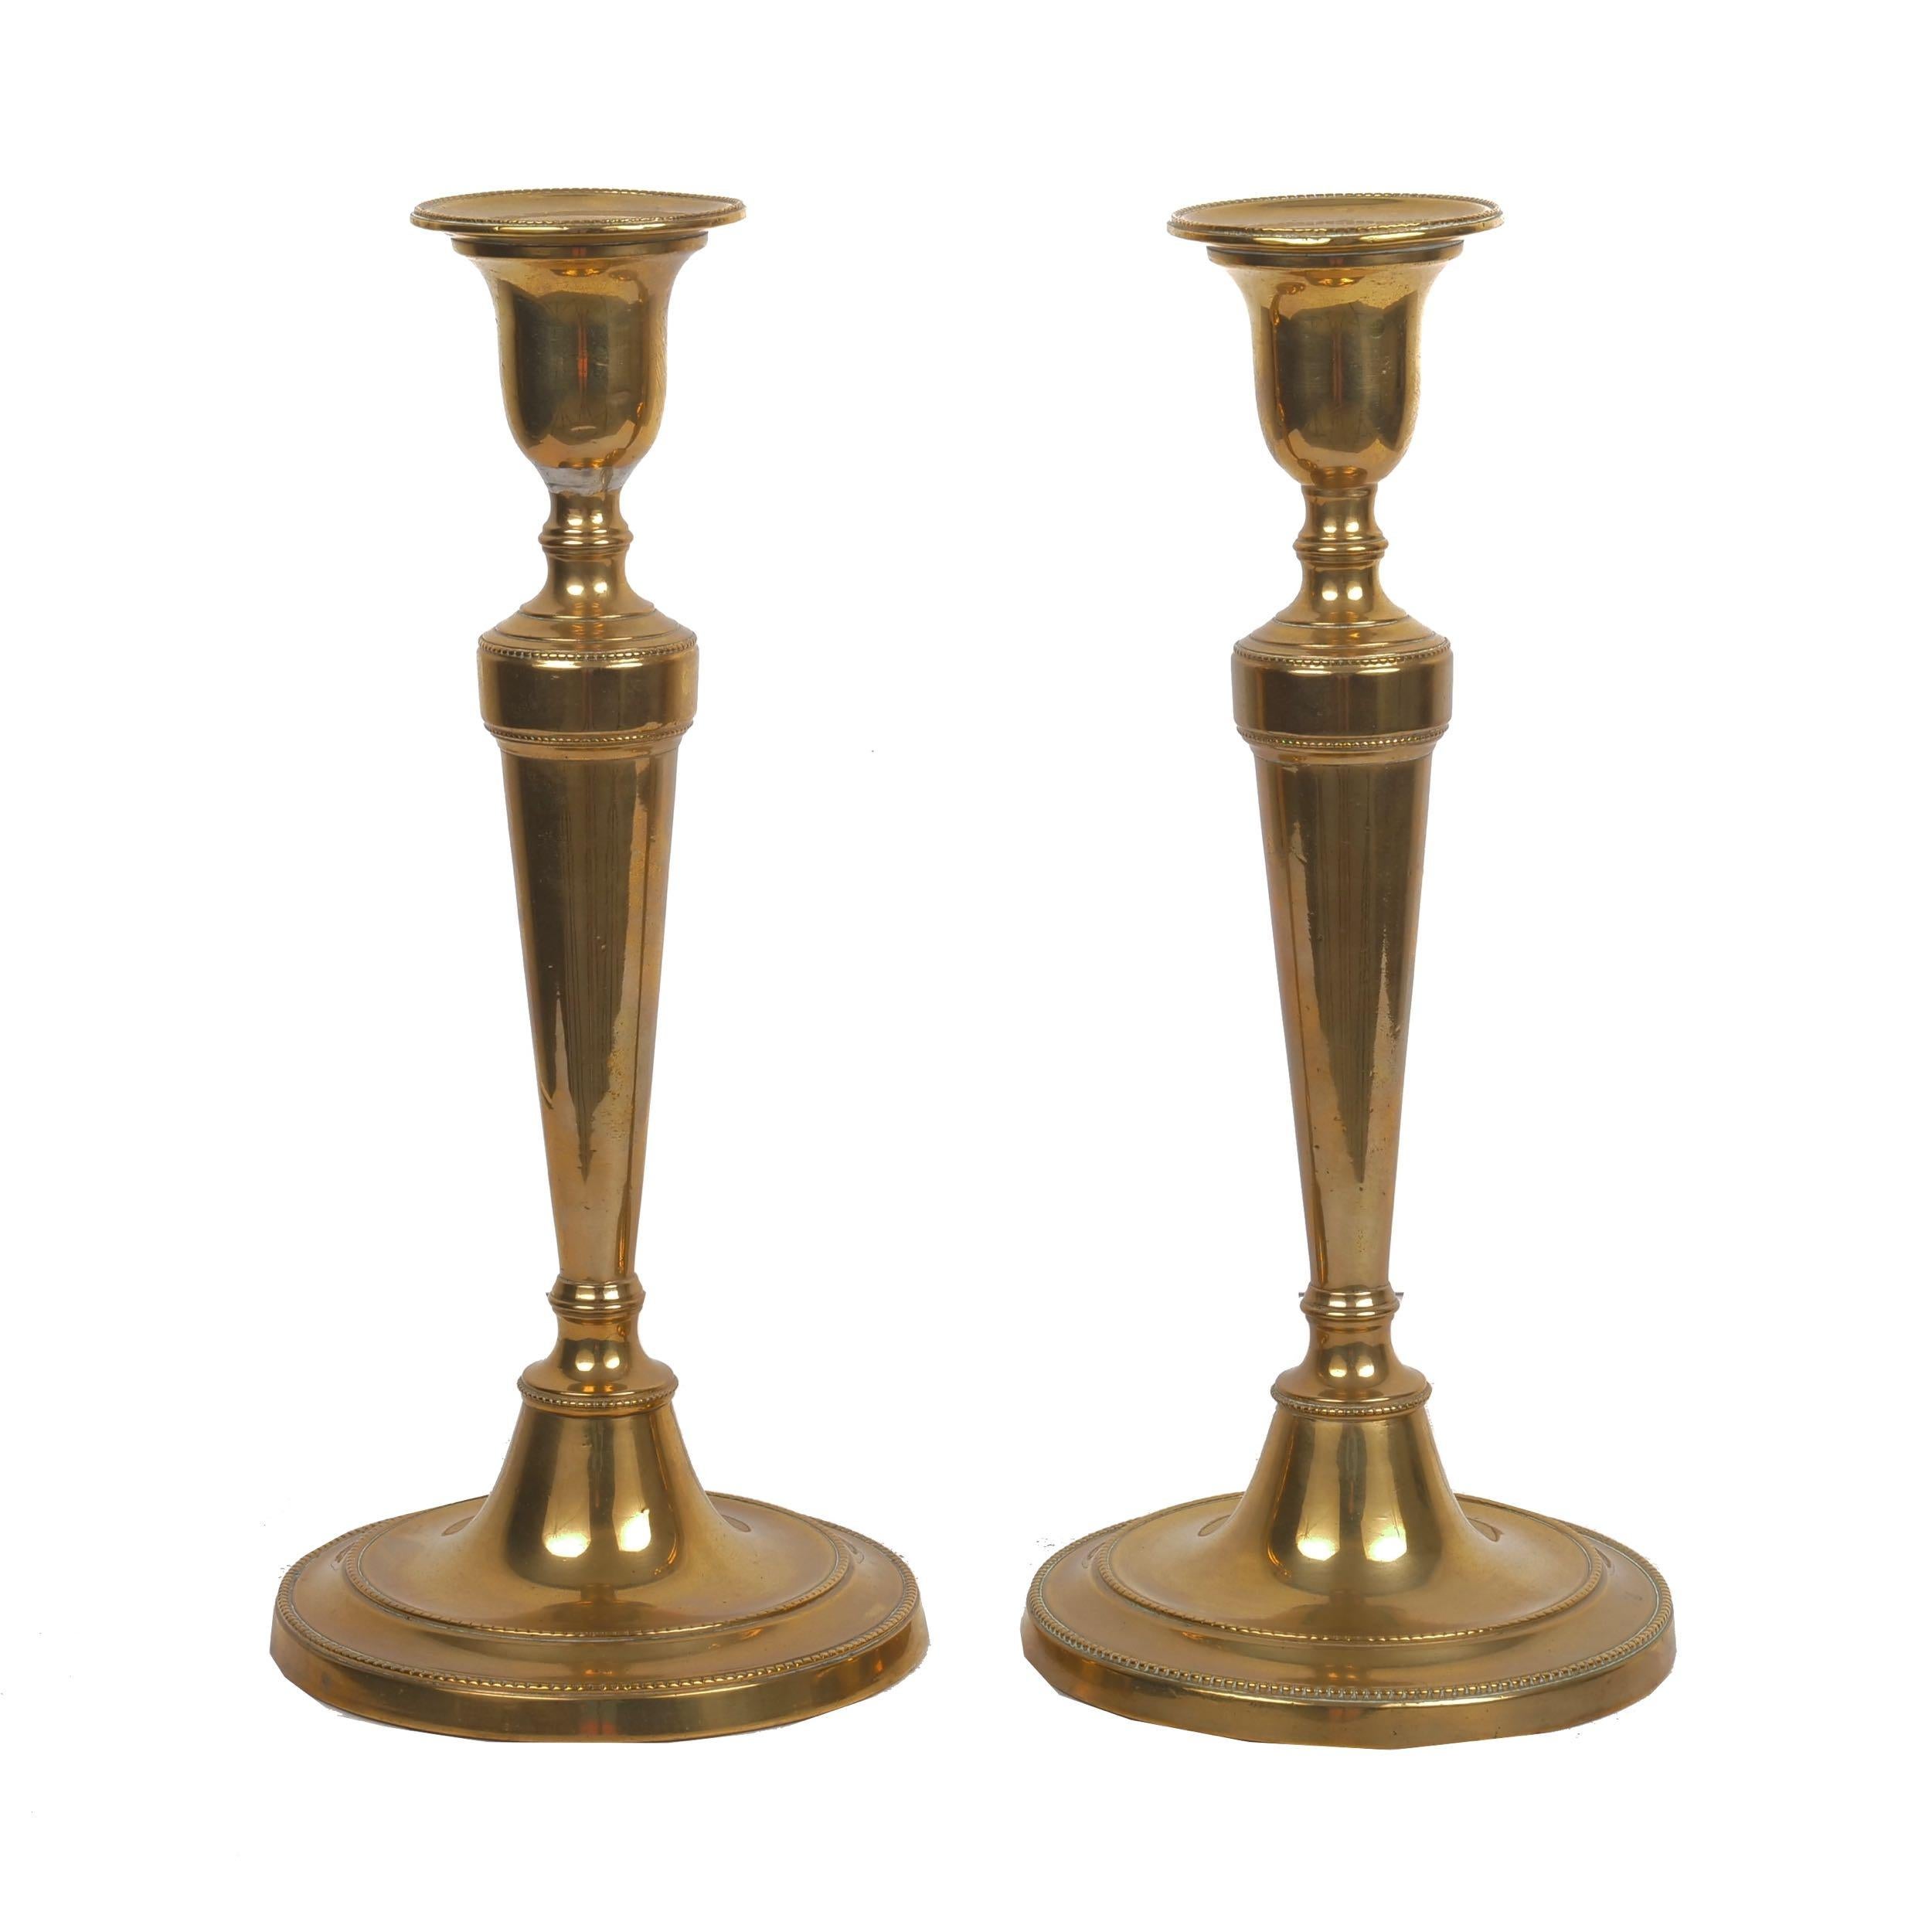 Pair of George III turned brass swollen-baluster candlesticks
England, circa early 19th century
Item # C104019 

A most attractive pair of Georgian turned brass candlesticks with swollen-baluster stems over turned bases and raised-relief